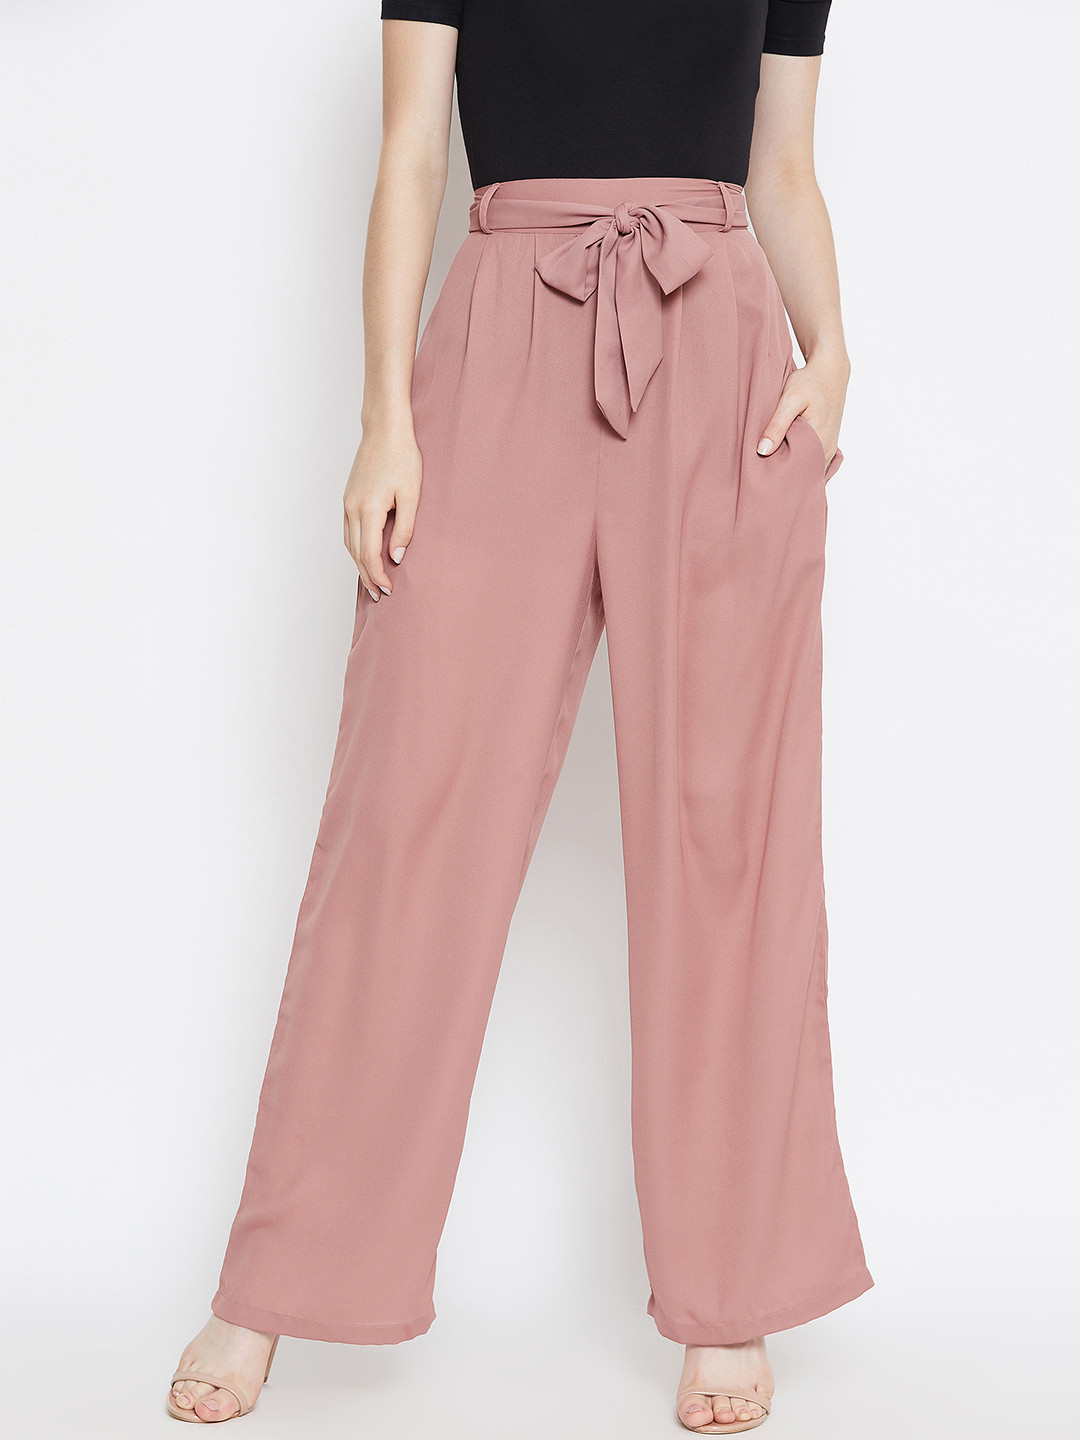 Buy MISS CHASE Womens 2 Pocket Tie-Up Detailing Flared Solid Pants |  Shoppers Stop